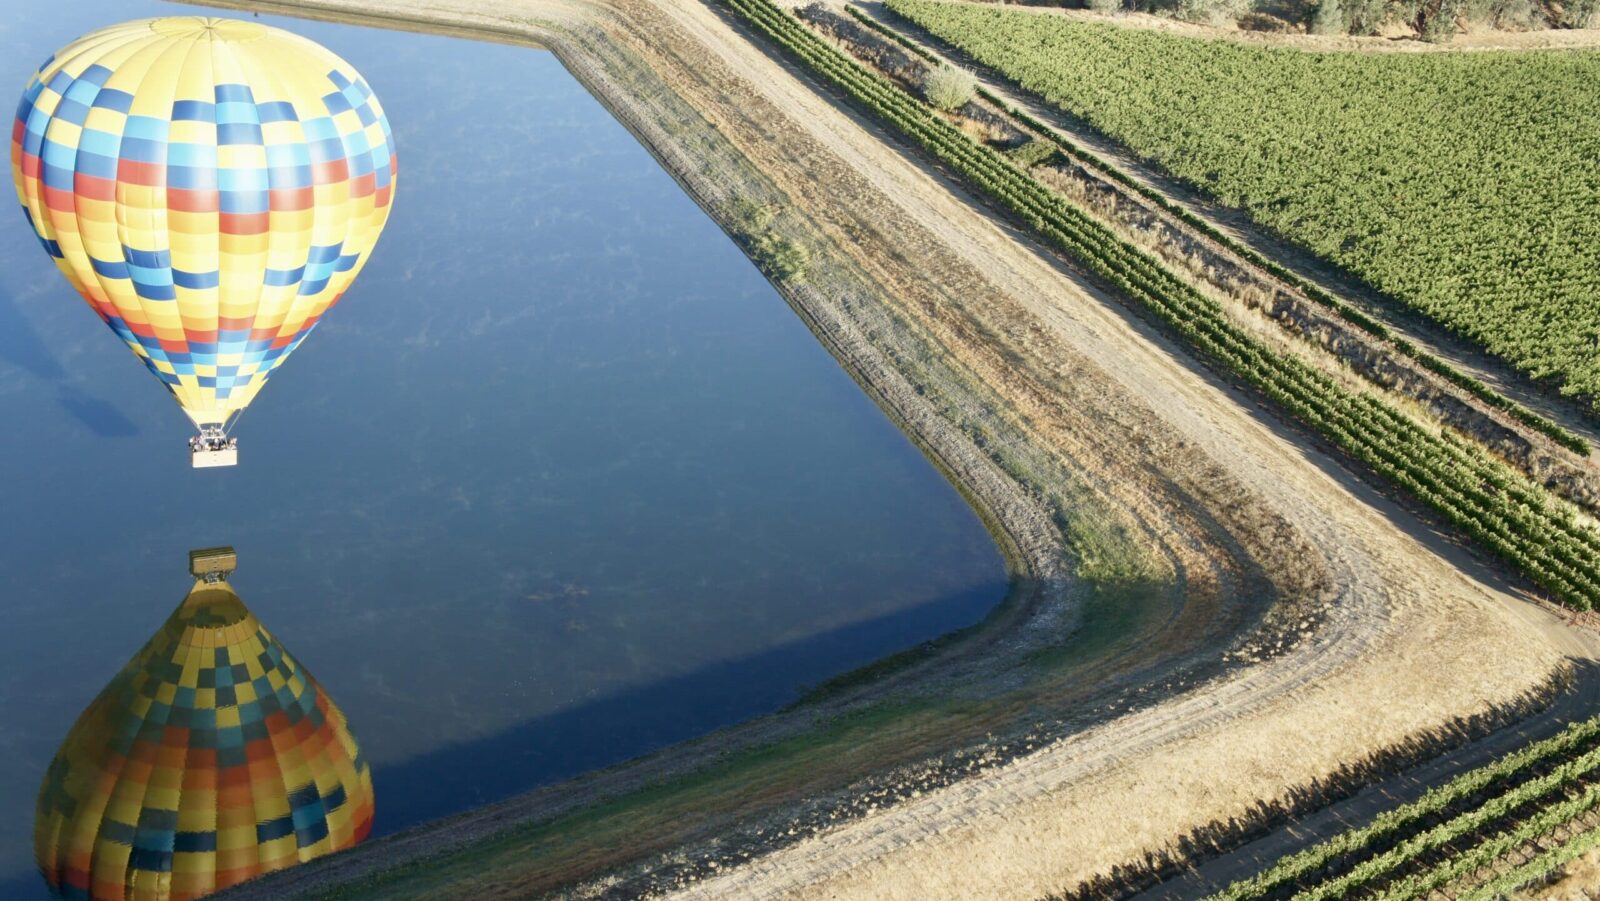 view of hot air balloon reflected in a pond, from the vantage point of a higher hot air balloon